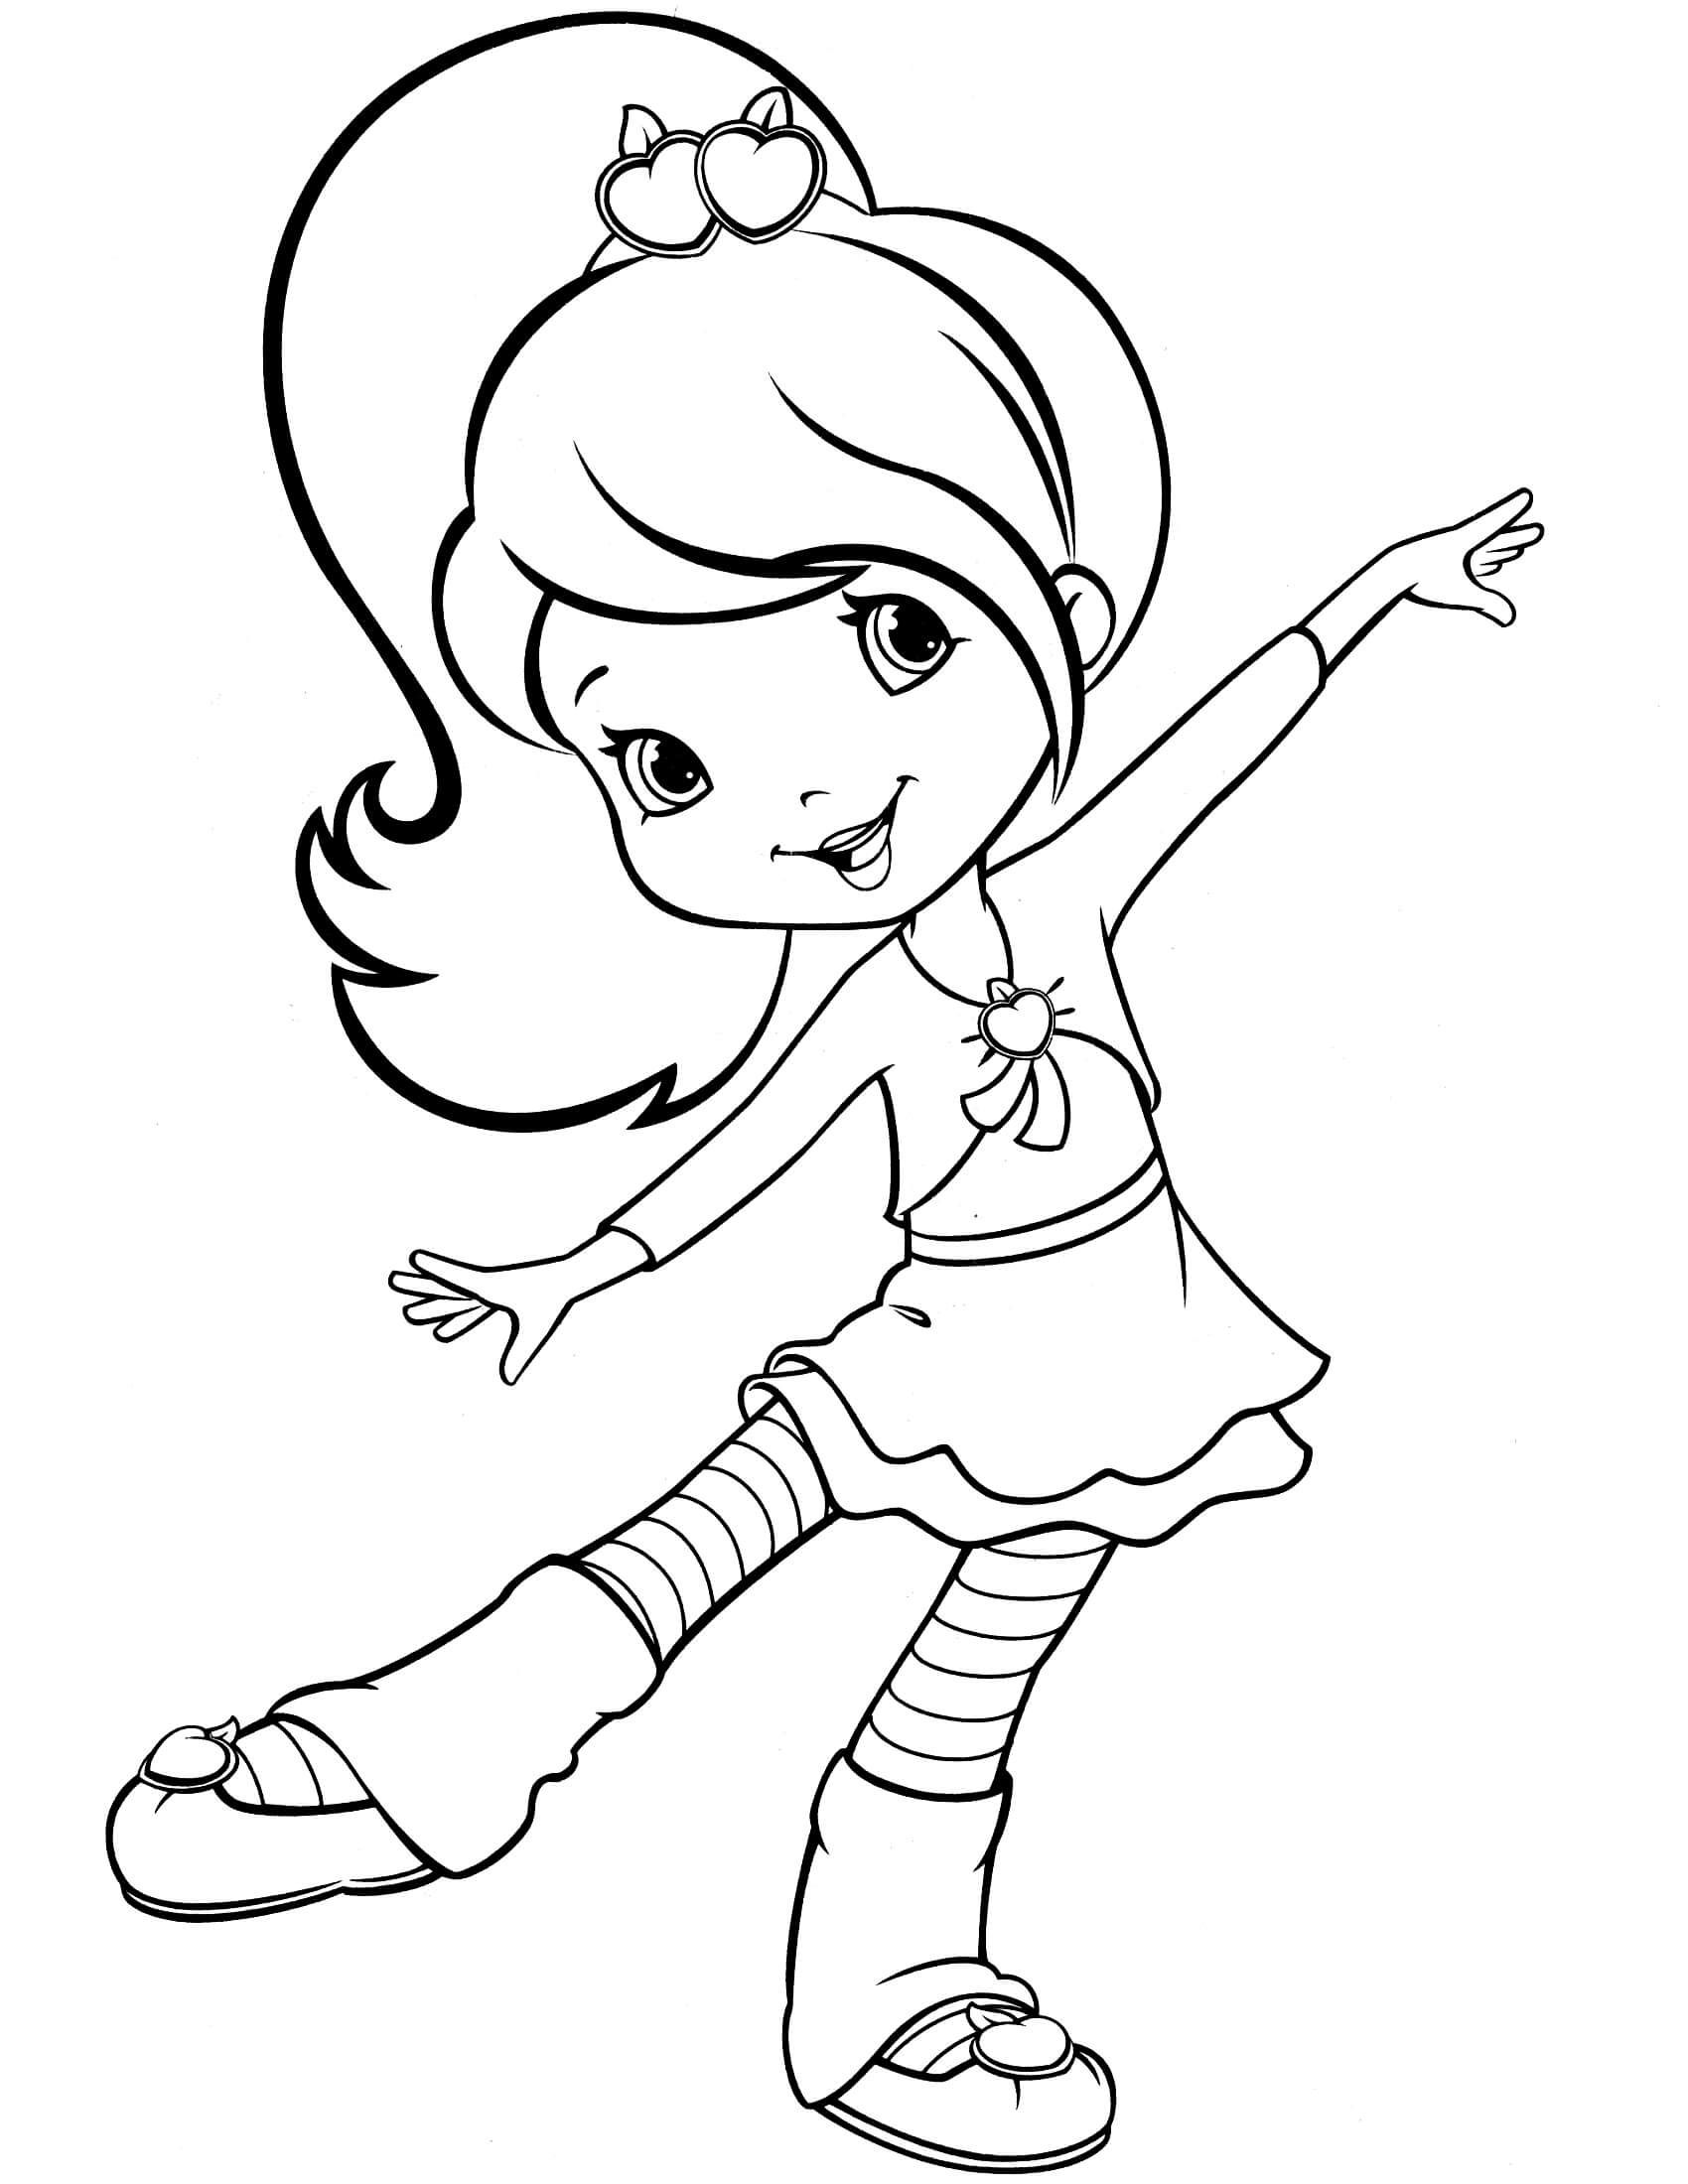 Printable Strawberry Shortcake Coloring Pages Pdf - Strawberry Shortcake And Friends Coloring Pages